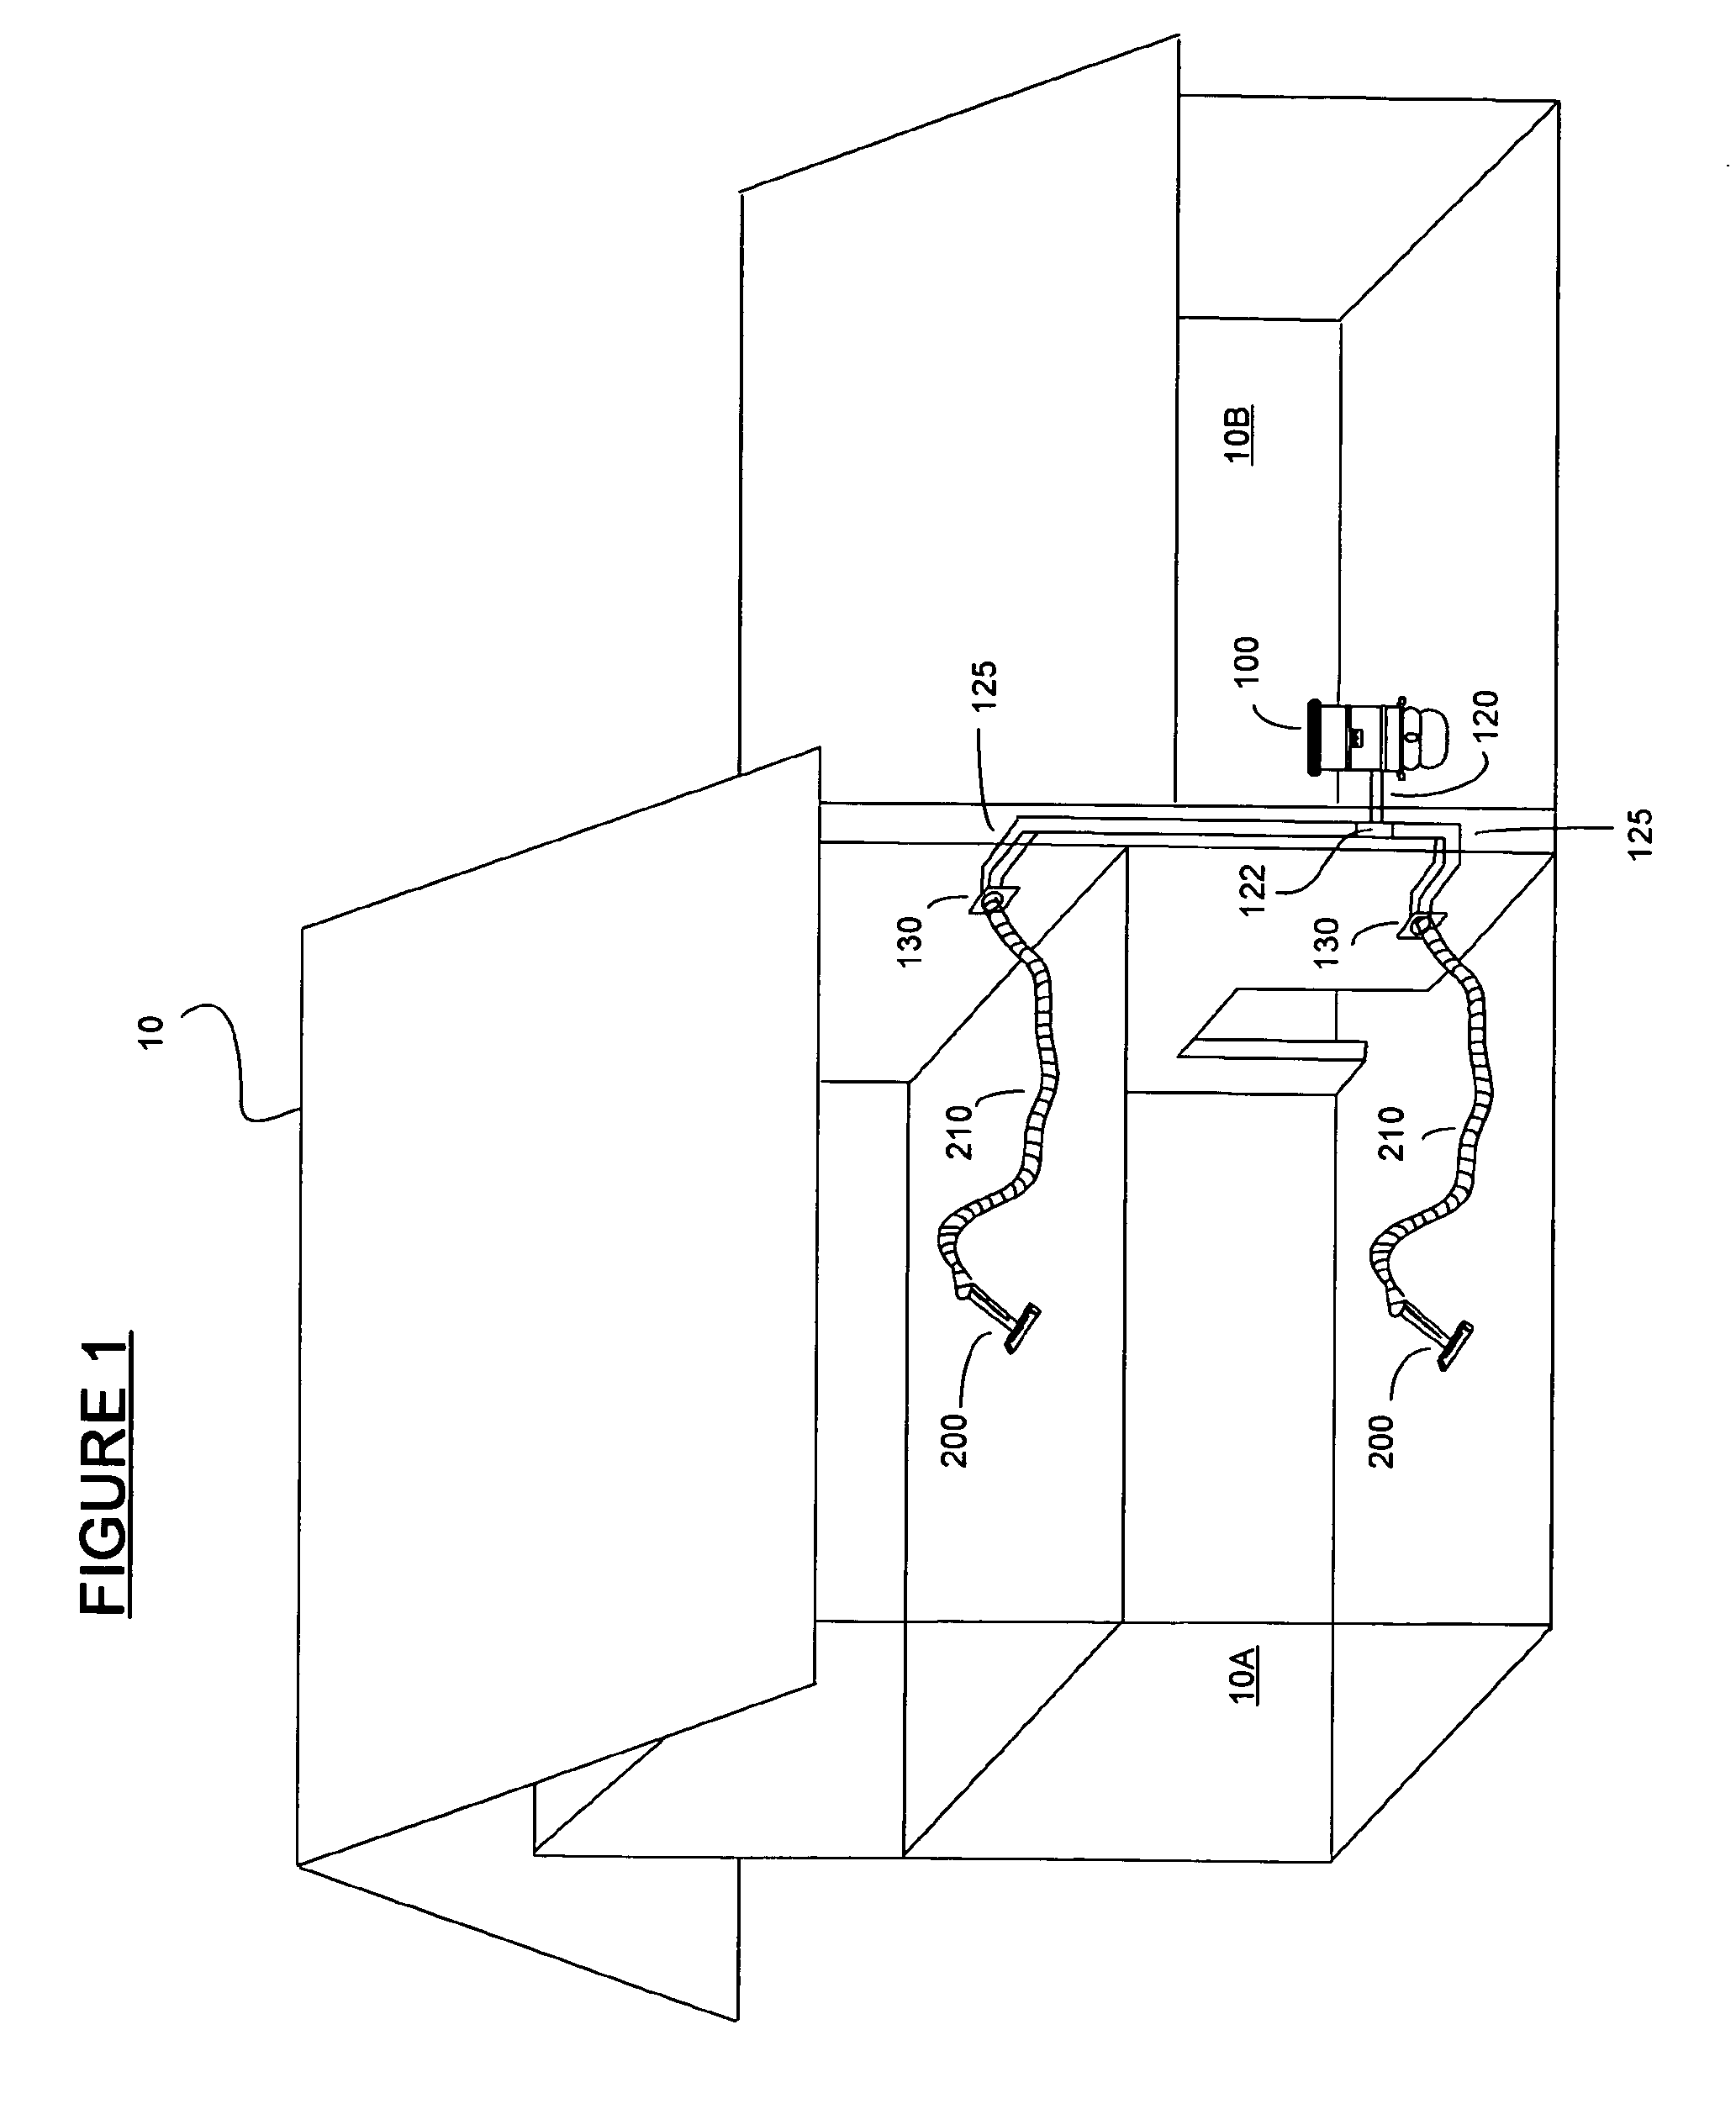 Electronic control system for a vacuum system